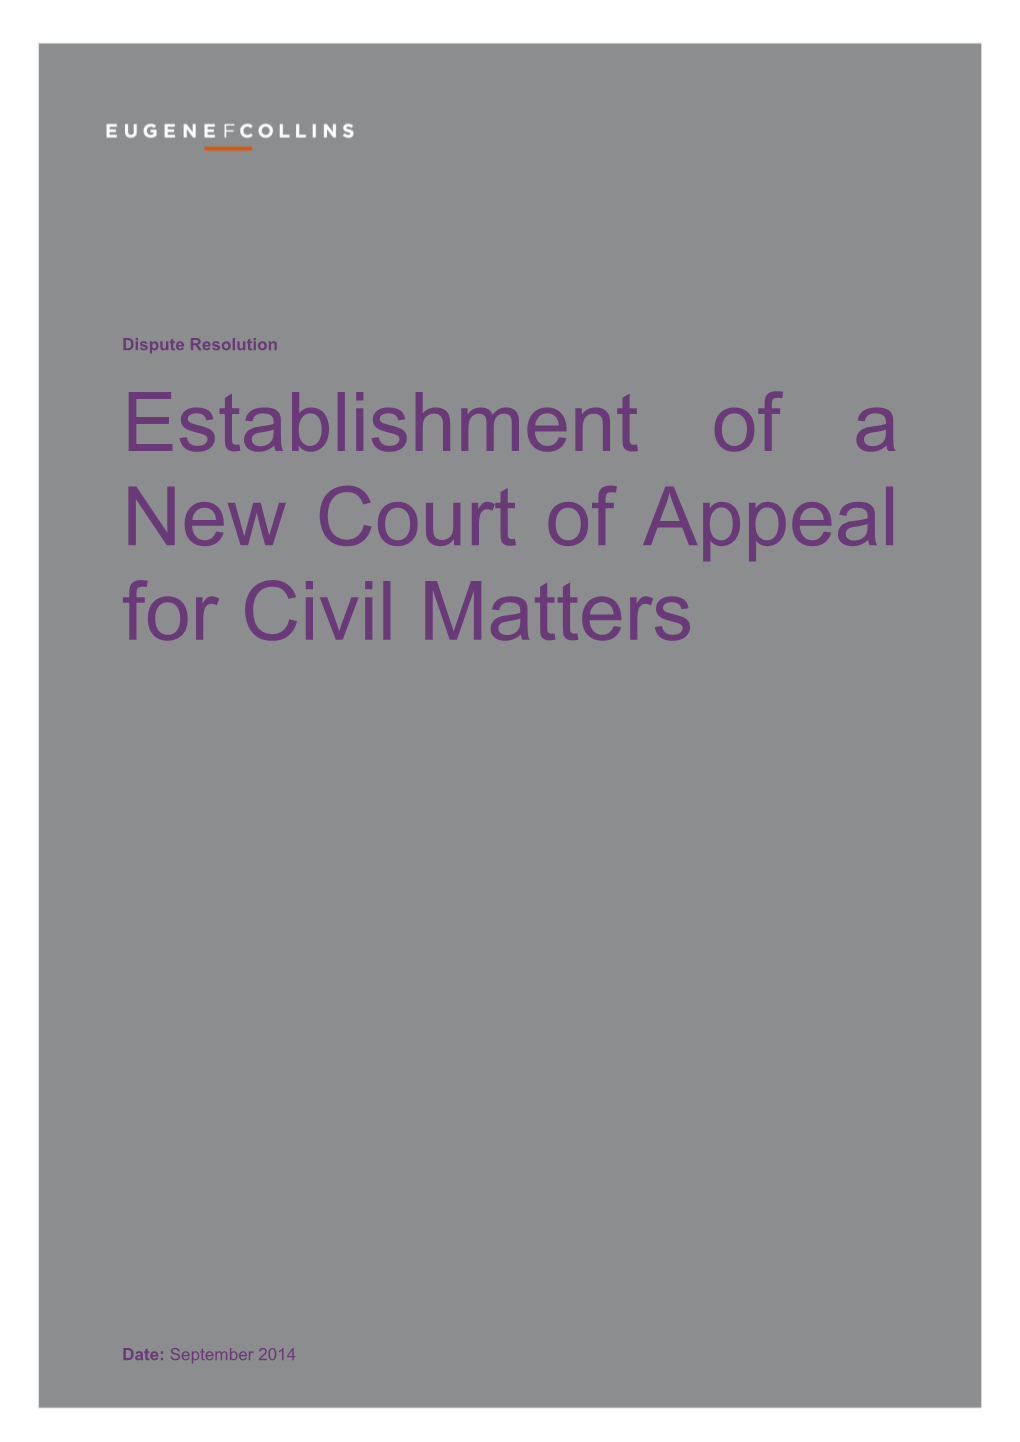 Establishment of a New Court of Appeal for Civil Matters